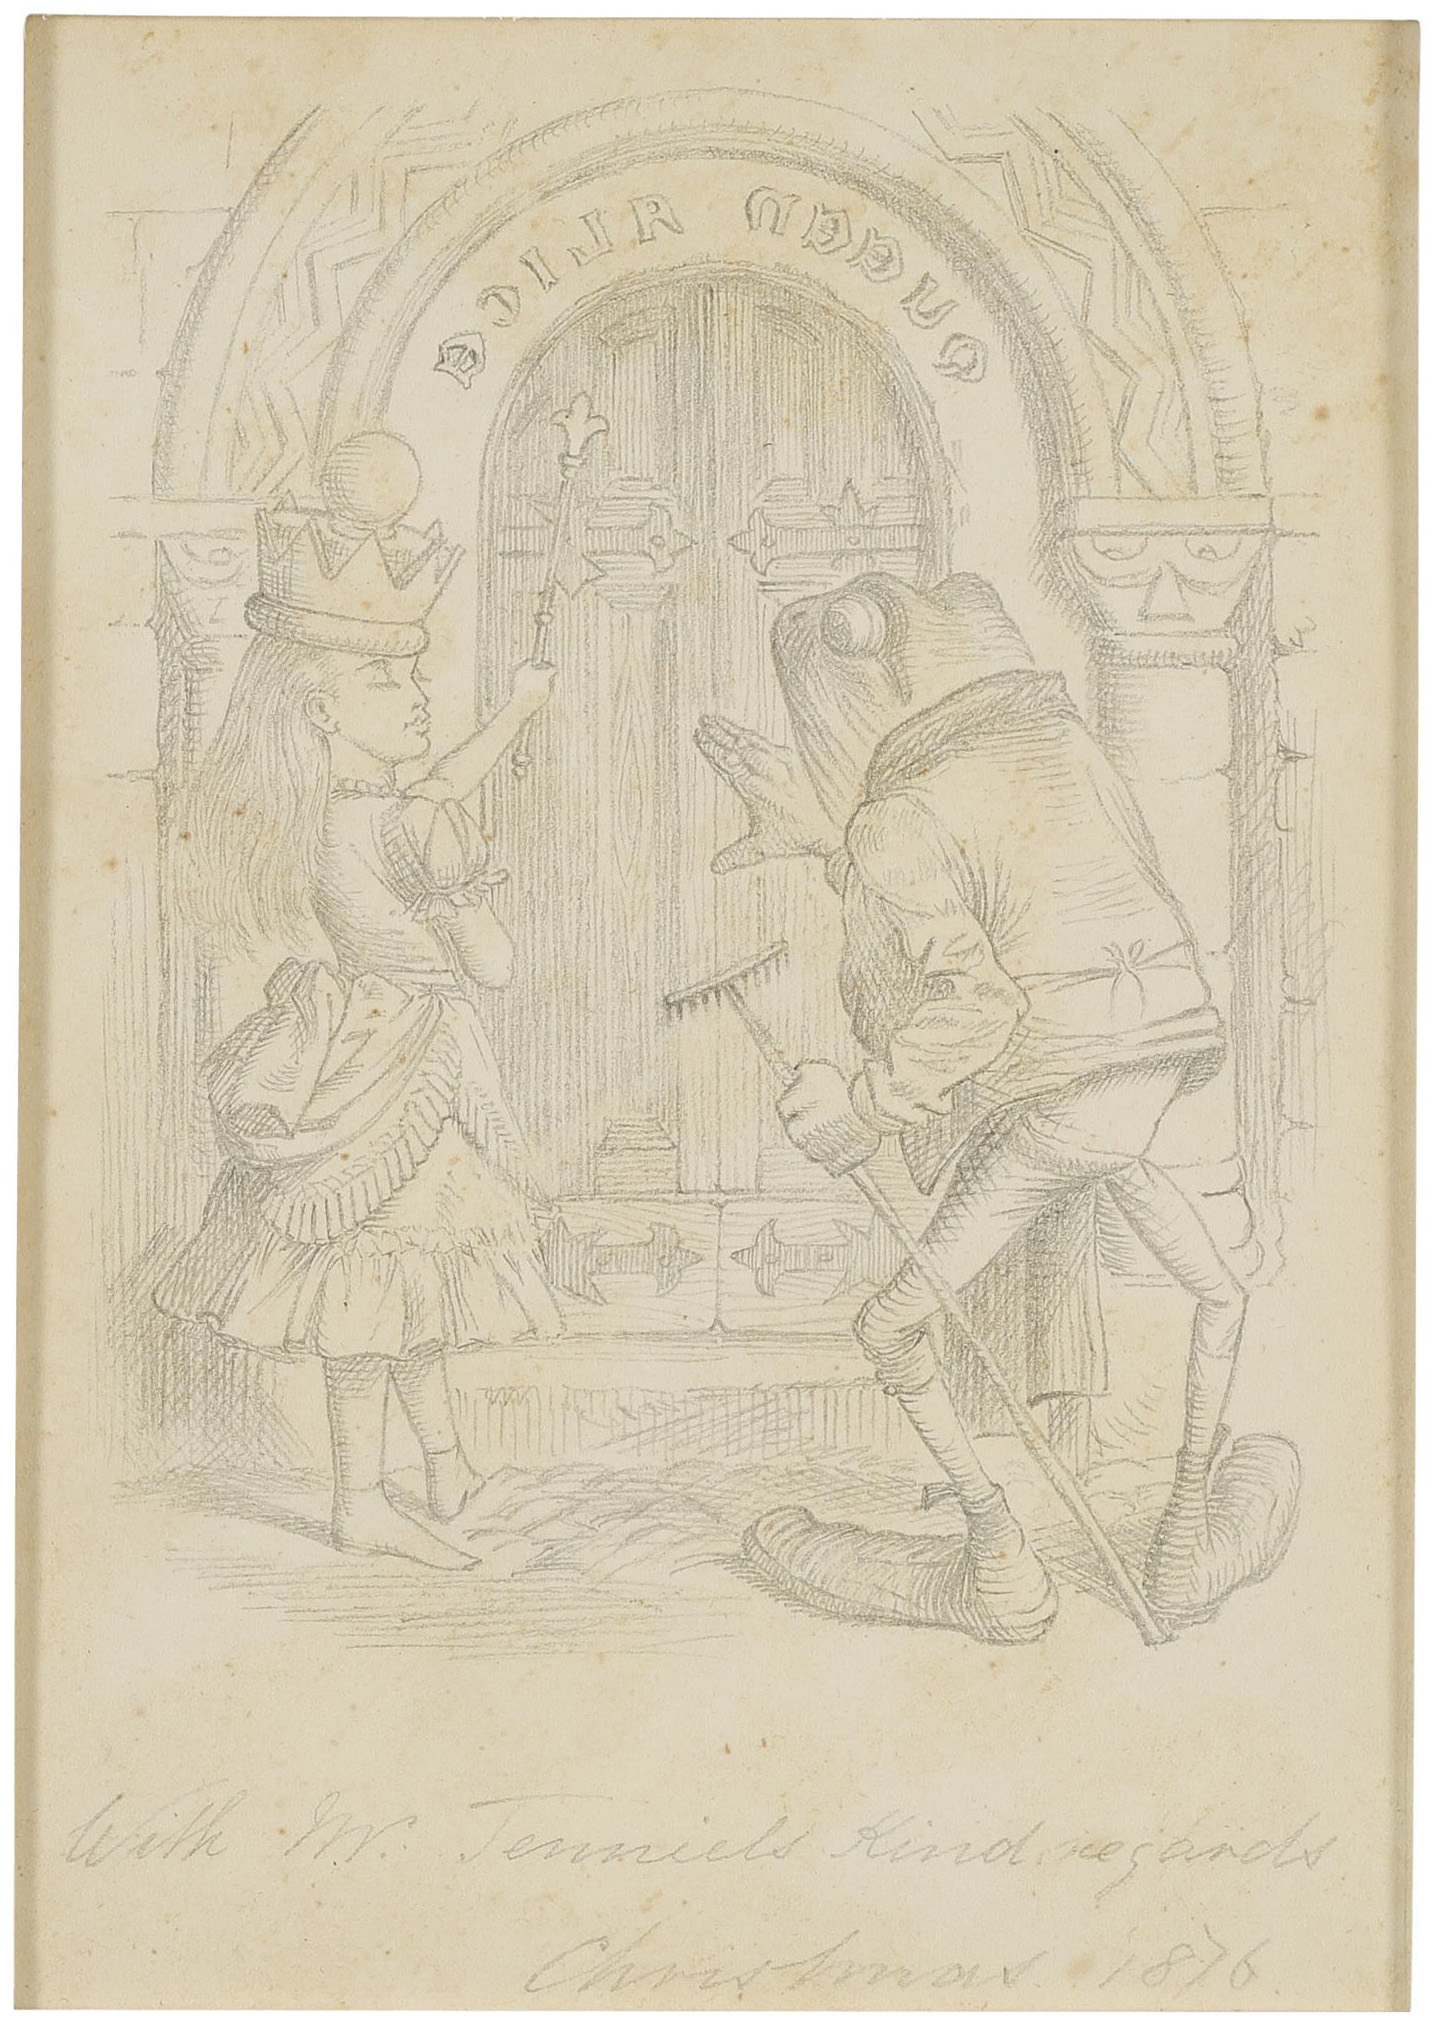 One of Sir John Tenniel's original illustrations for the first edition of ''Through the Looking Glass'' by Lewis Carroll.